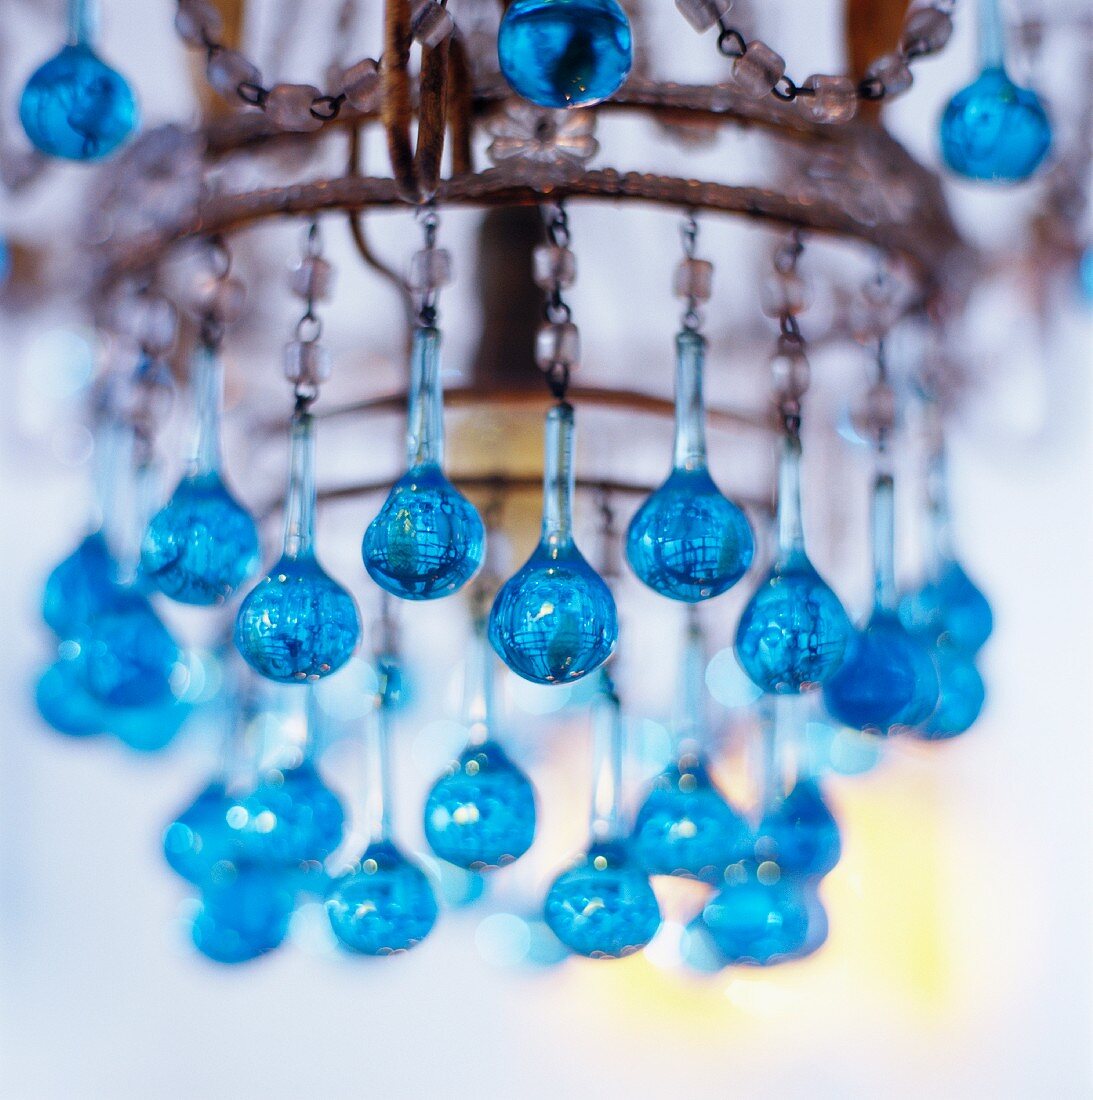 Chandelier with blue glass beads